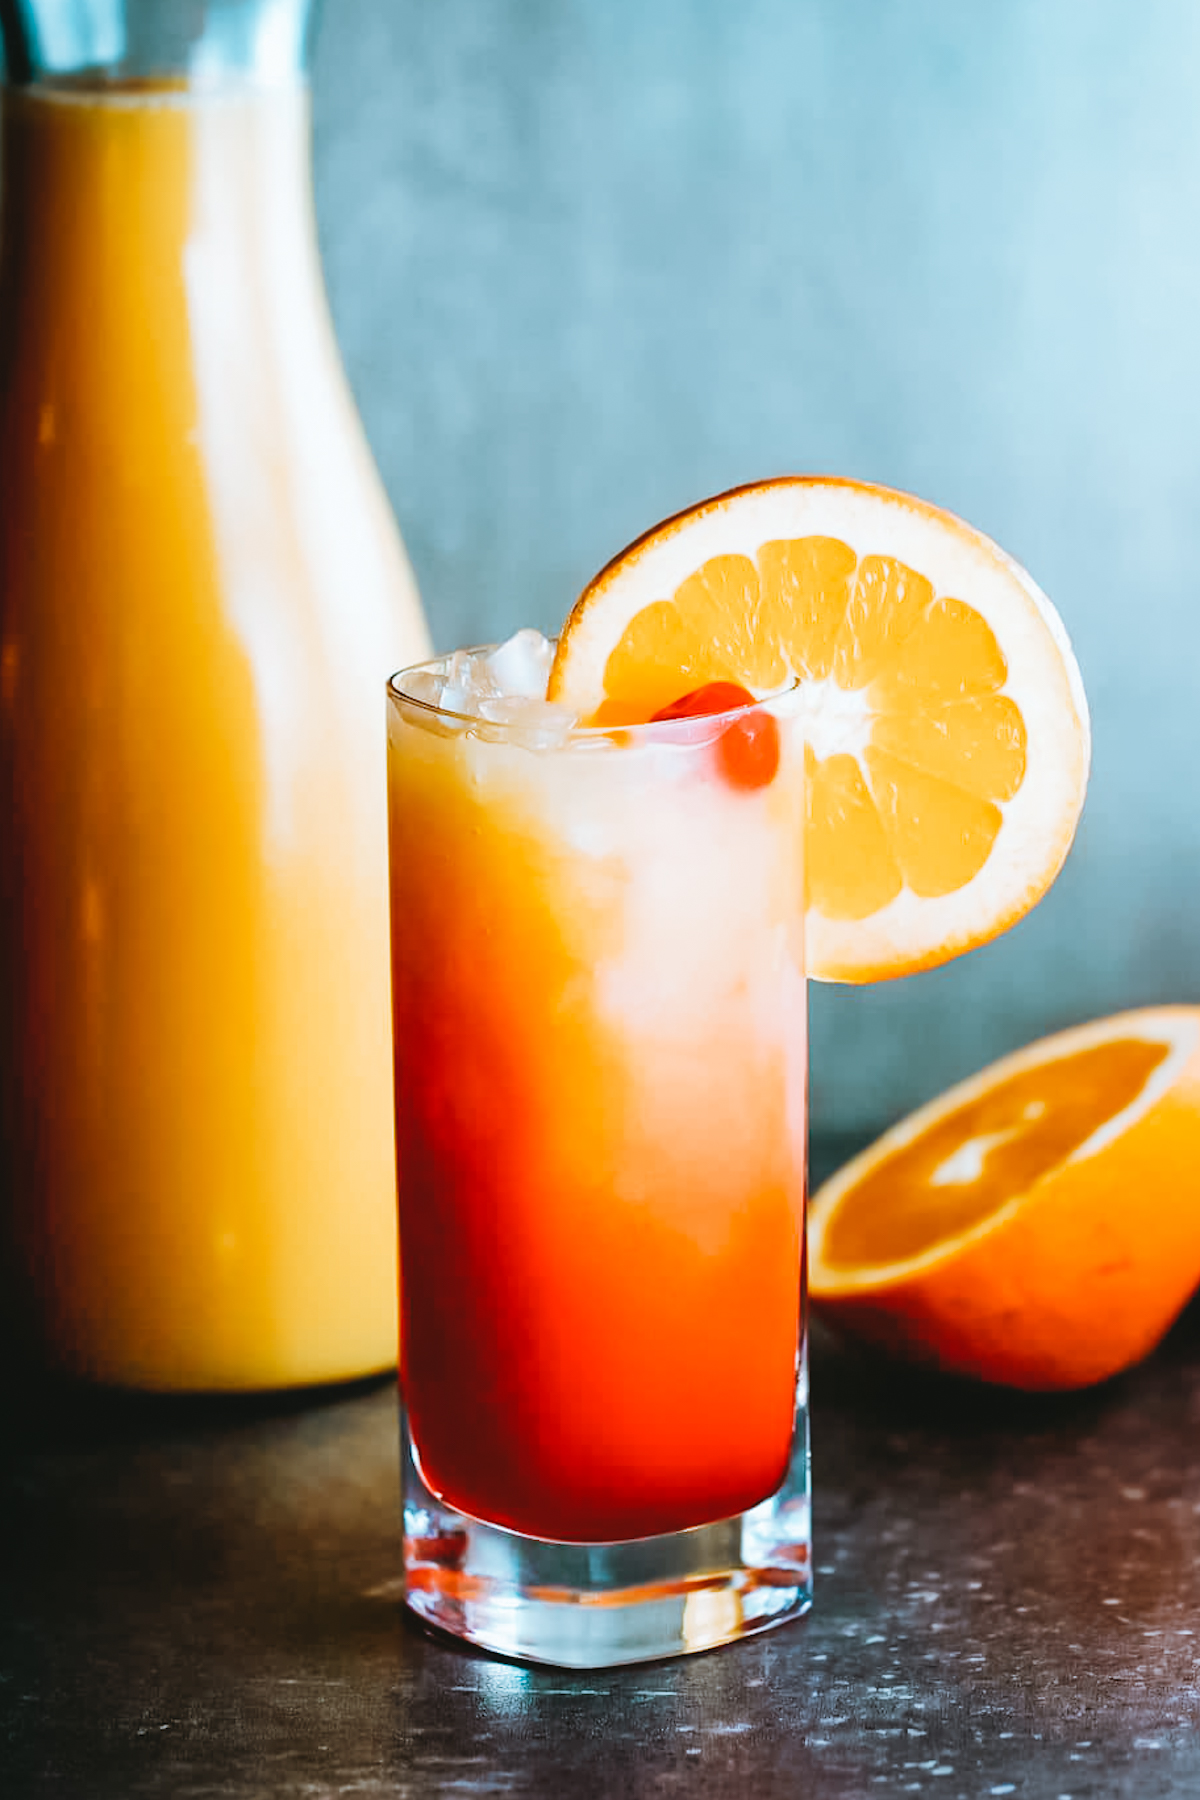 A Beautiful Brunchtime Beverage – Tribe’s CBD Tequila Sunrise